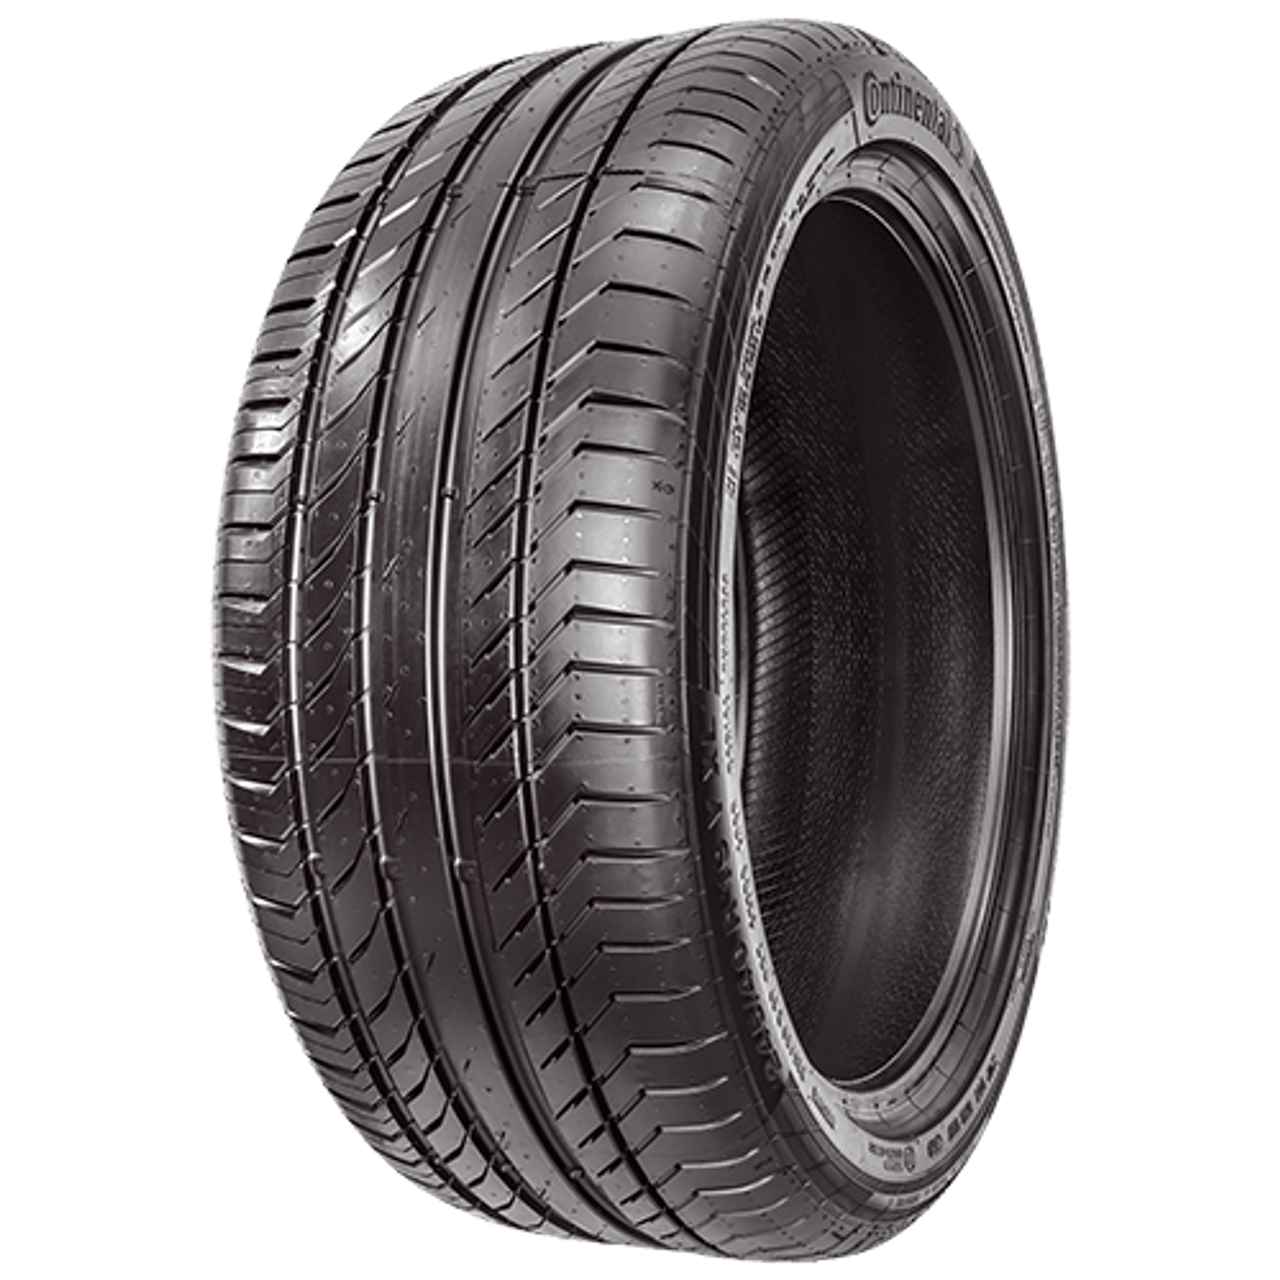 CONTINENTAL CONTISPORTCONTACT 5 SUV (VOL) 235/60R18 103H FR BSW